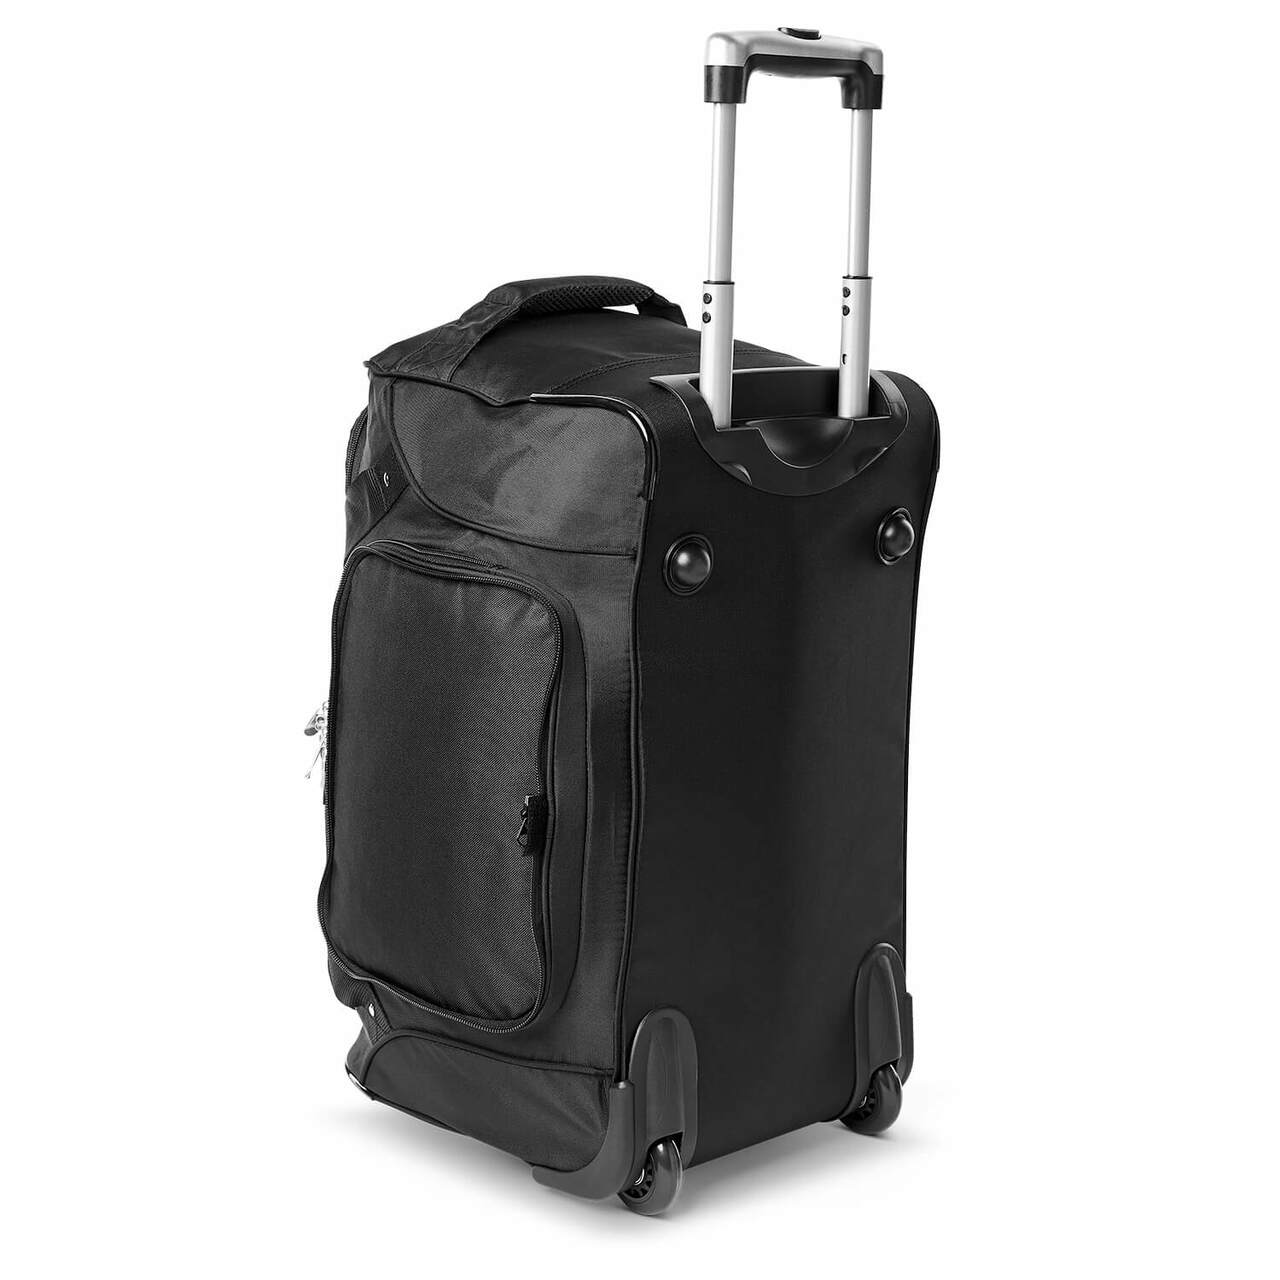 Purdue Boilermakers Luggage | Purdue Boilermakers Wheeled Carry On Luggage